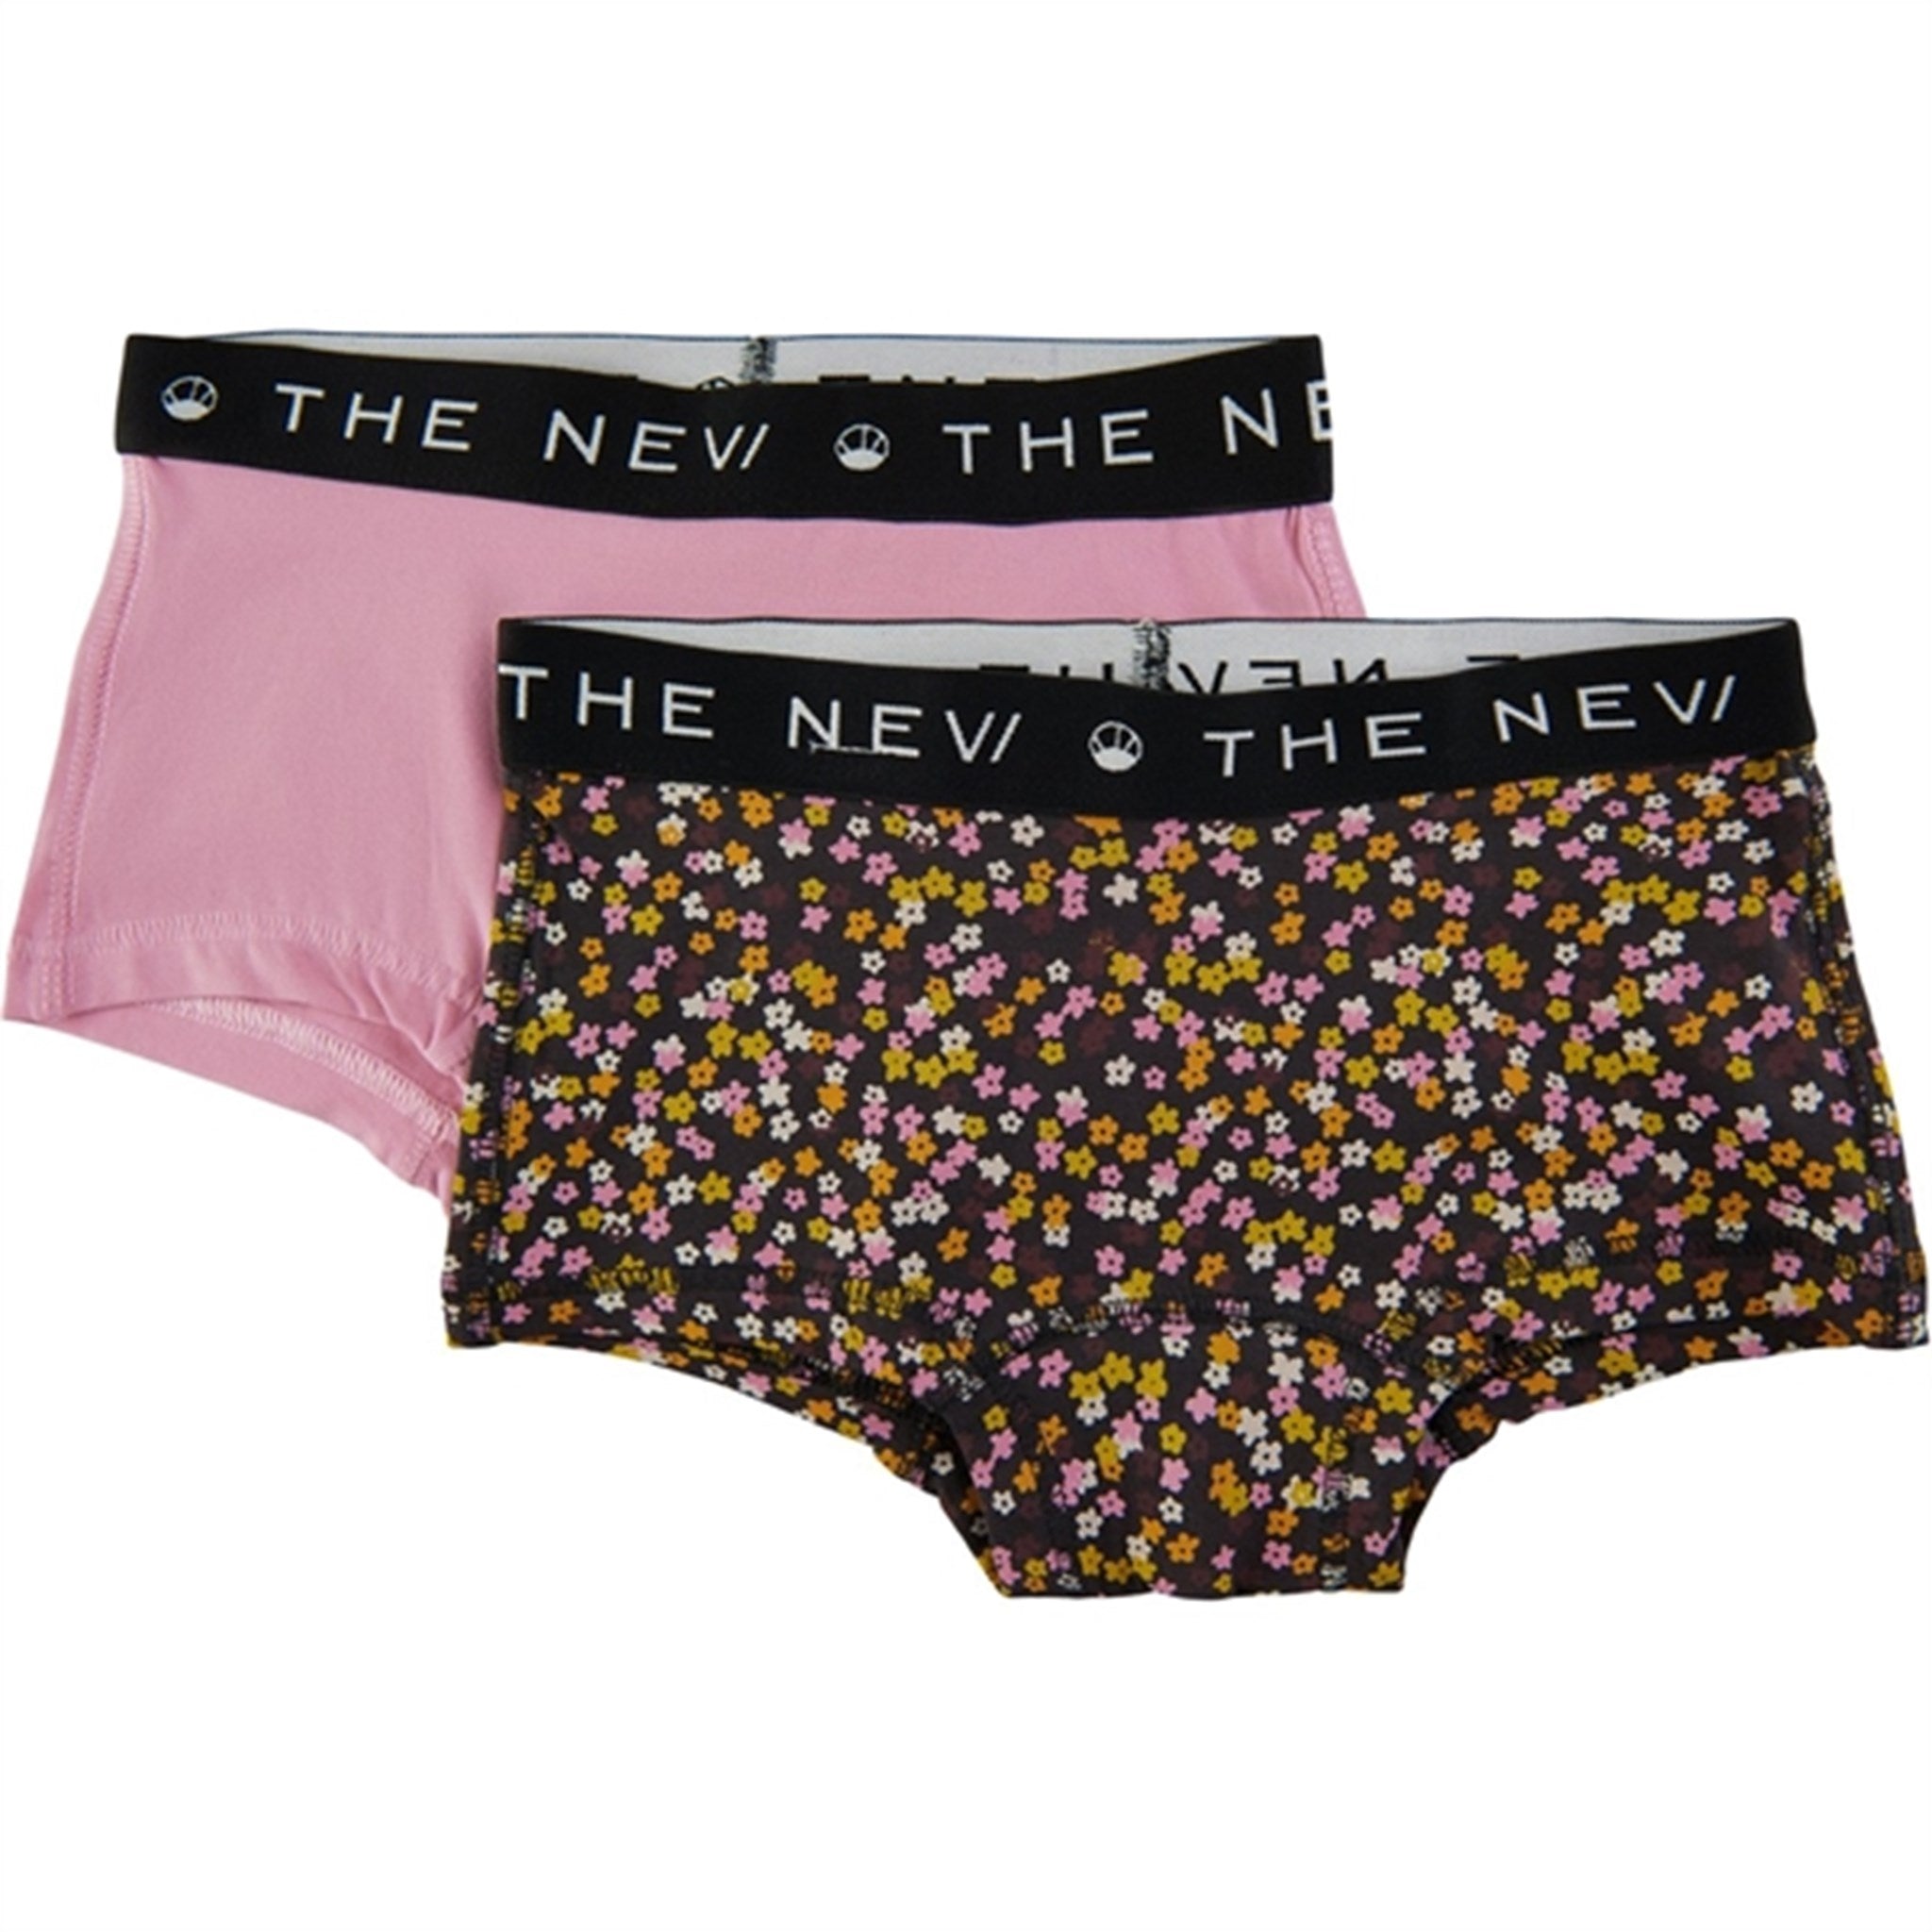 The New Pastel lavender Hipsters 2-pak